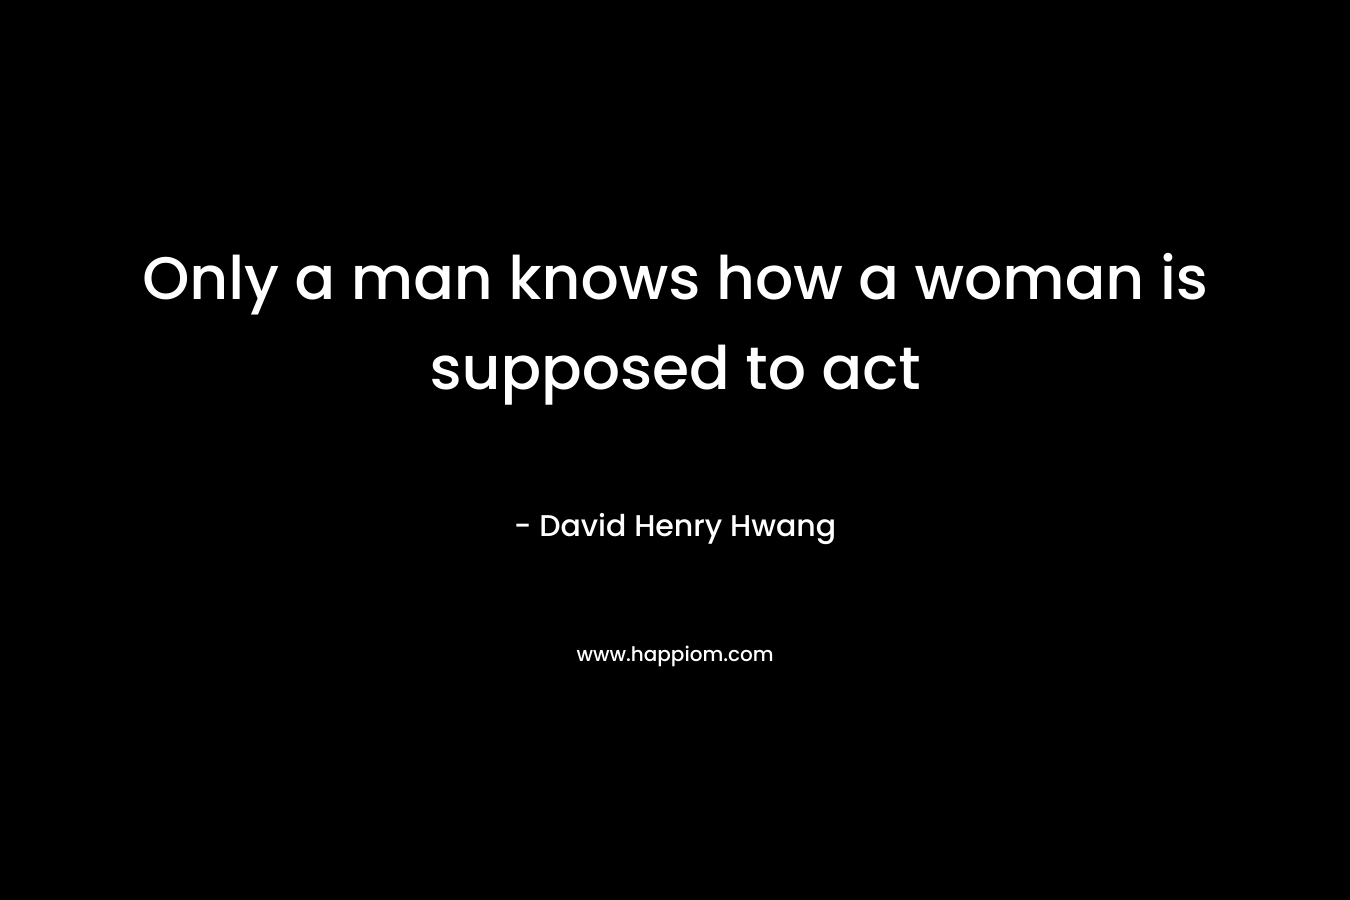 Only a man knows how a woman is supposed to act